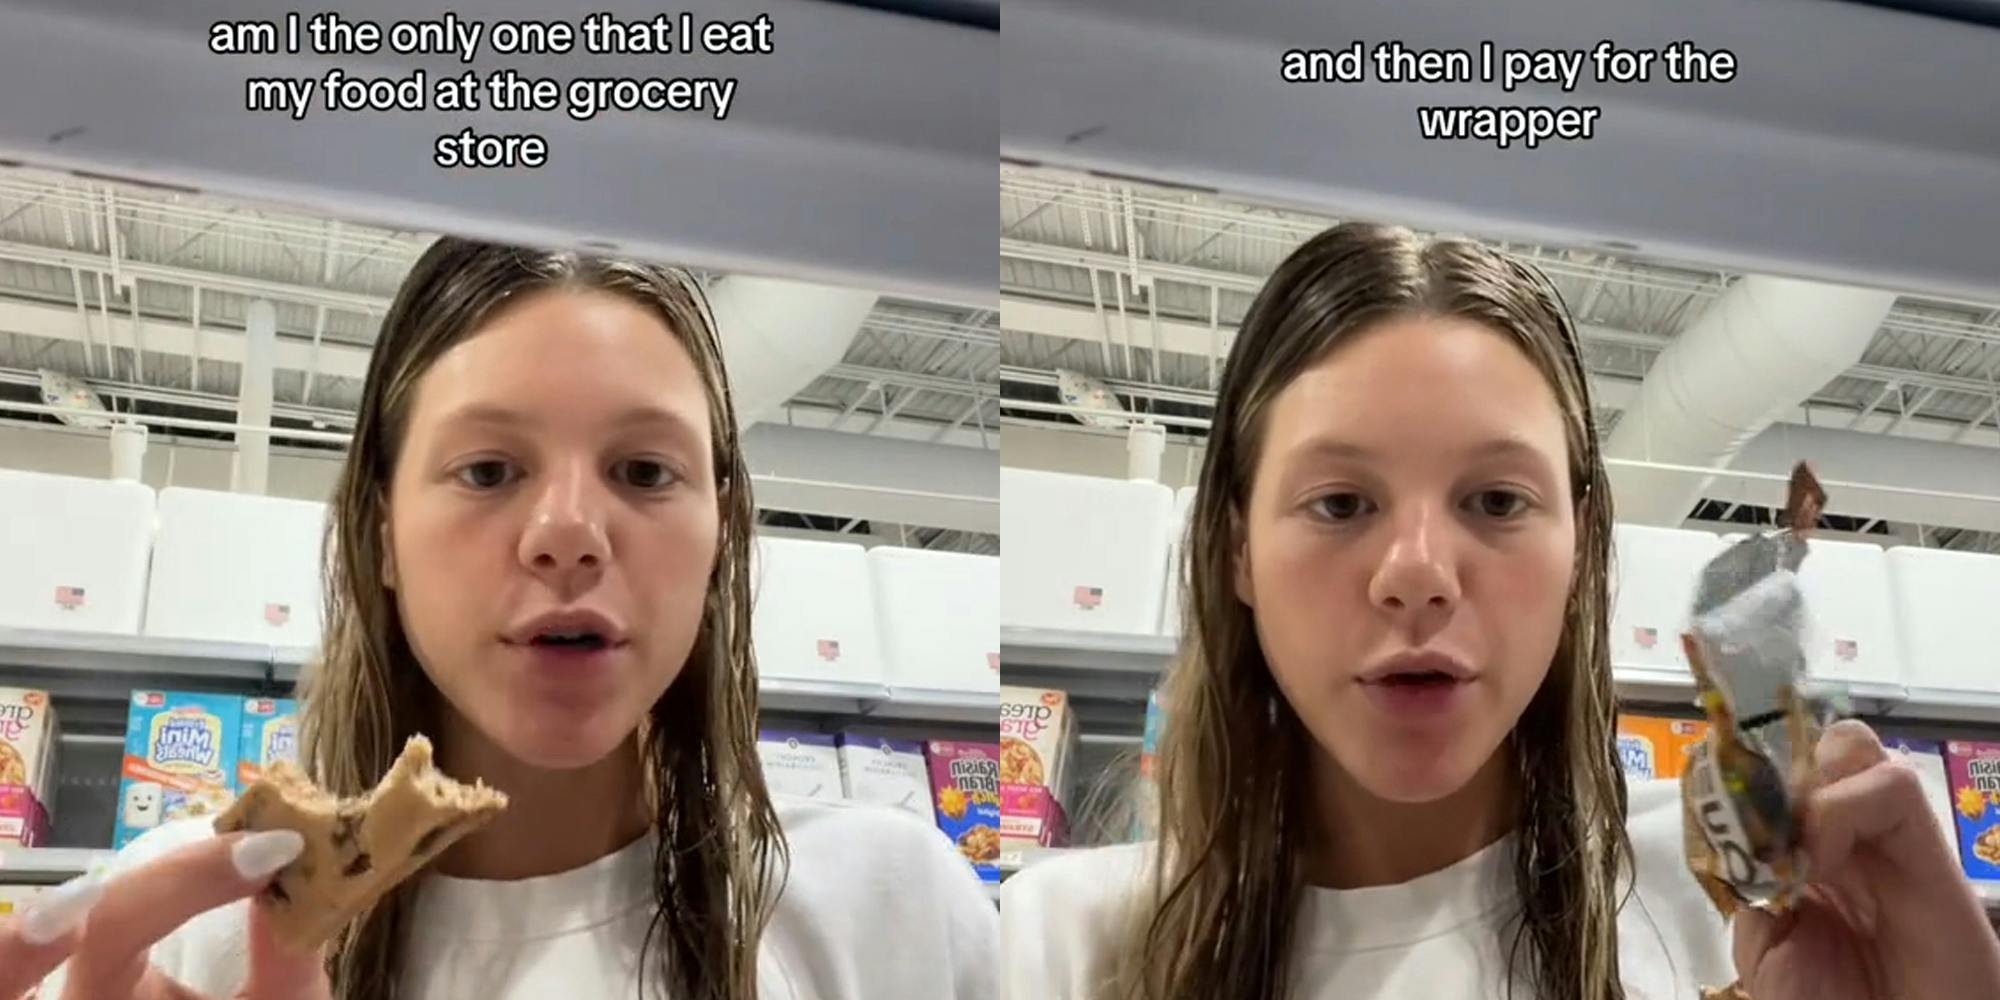 'I gasped the first time': Girl eats at the grocery store and pays for just the wrapper. Is that legal?